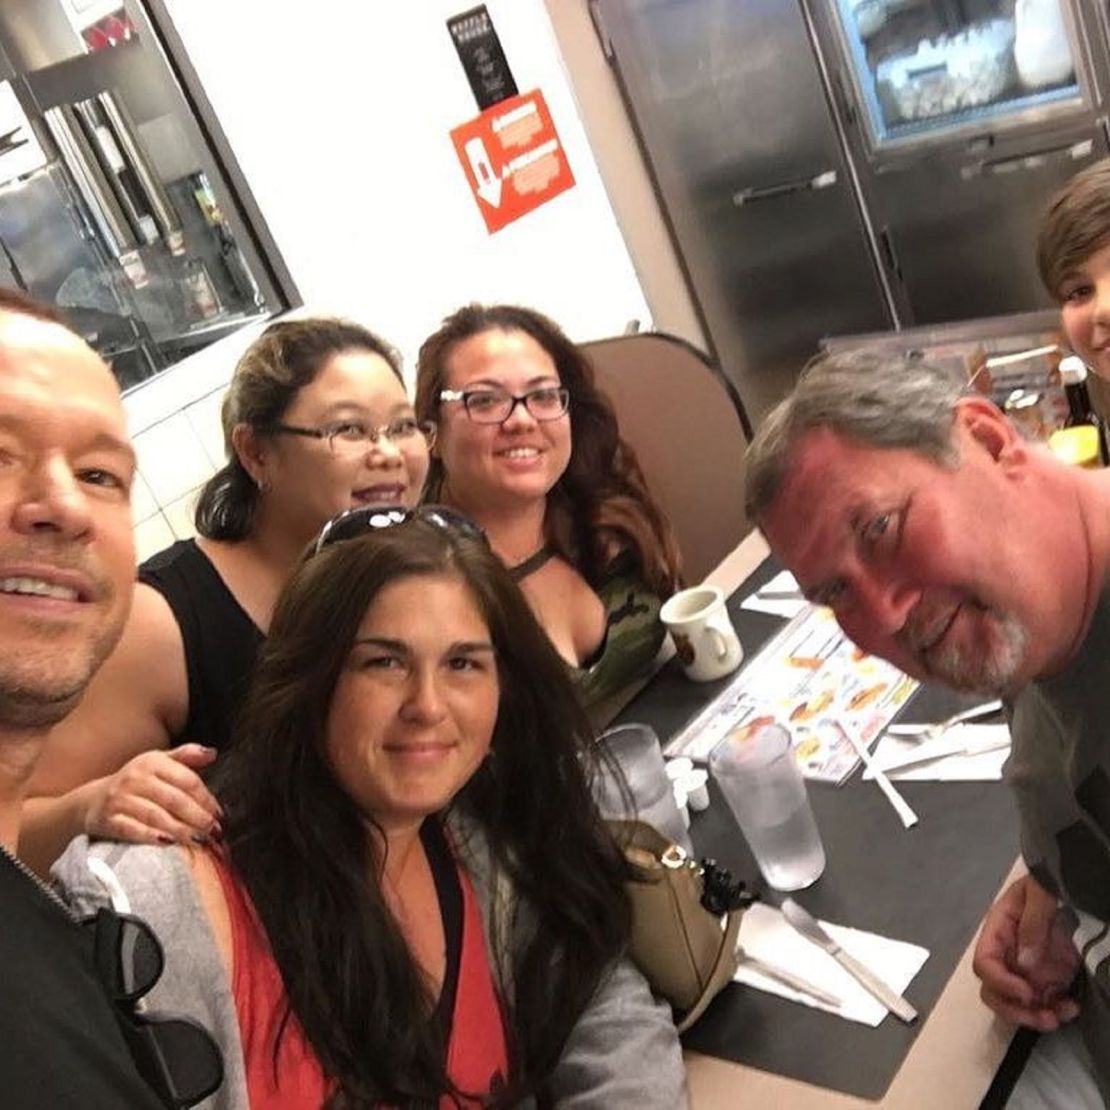 Donnie Wahlberg poses for a selfie with some fans.